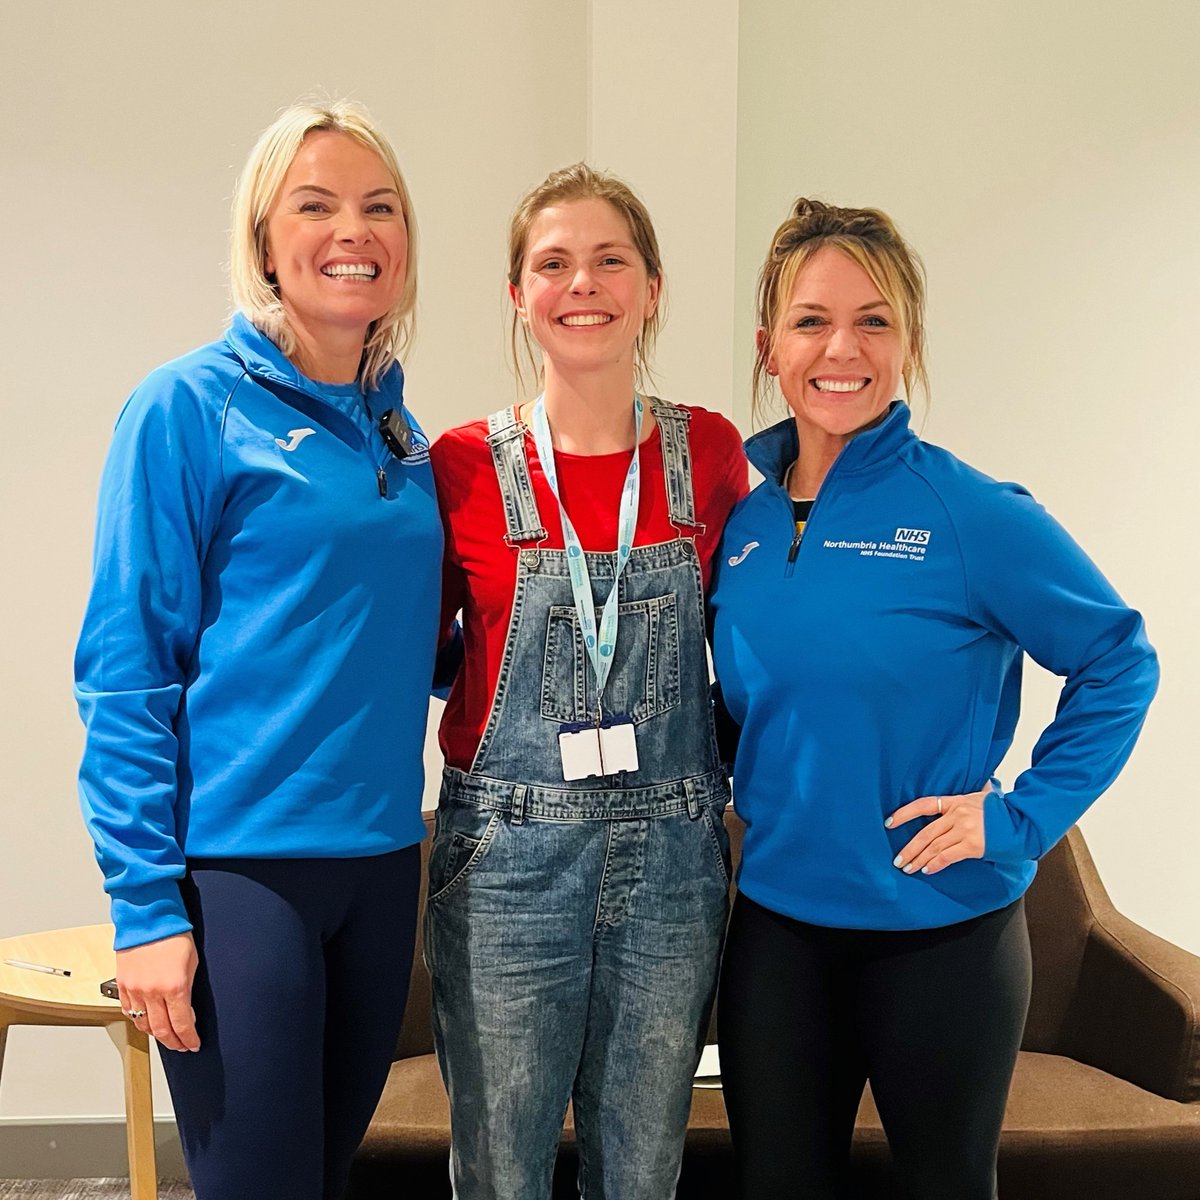 Episode 4 of our Wor Wellbeing podcast is now live! In this episode, we're joined by Annie Poremba and Kayleigh Bradley, to talk about our Happy Healthy Mams programme💙 Available on your favourite platforms: YouTube - ow.ly/eIST50REcSC Spotify - ow.ly/pyo350REcSw